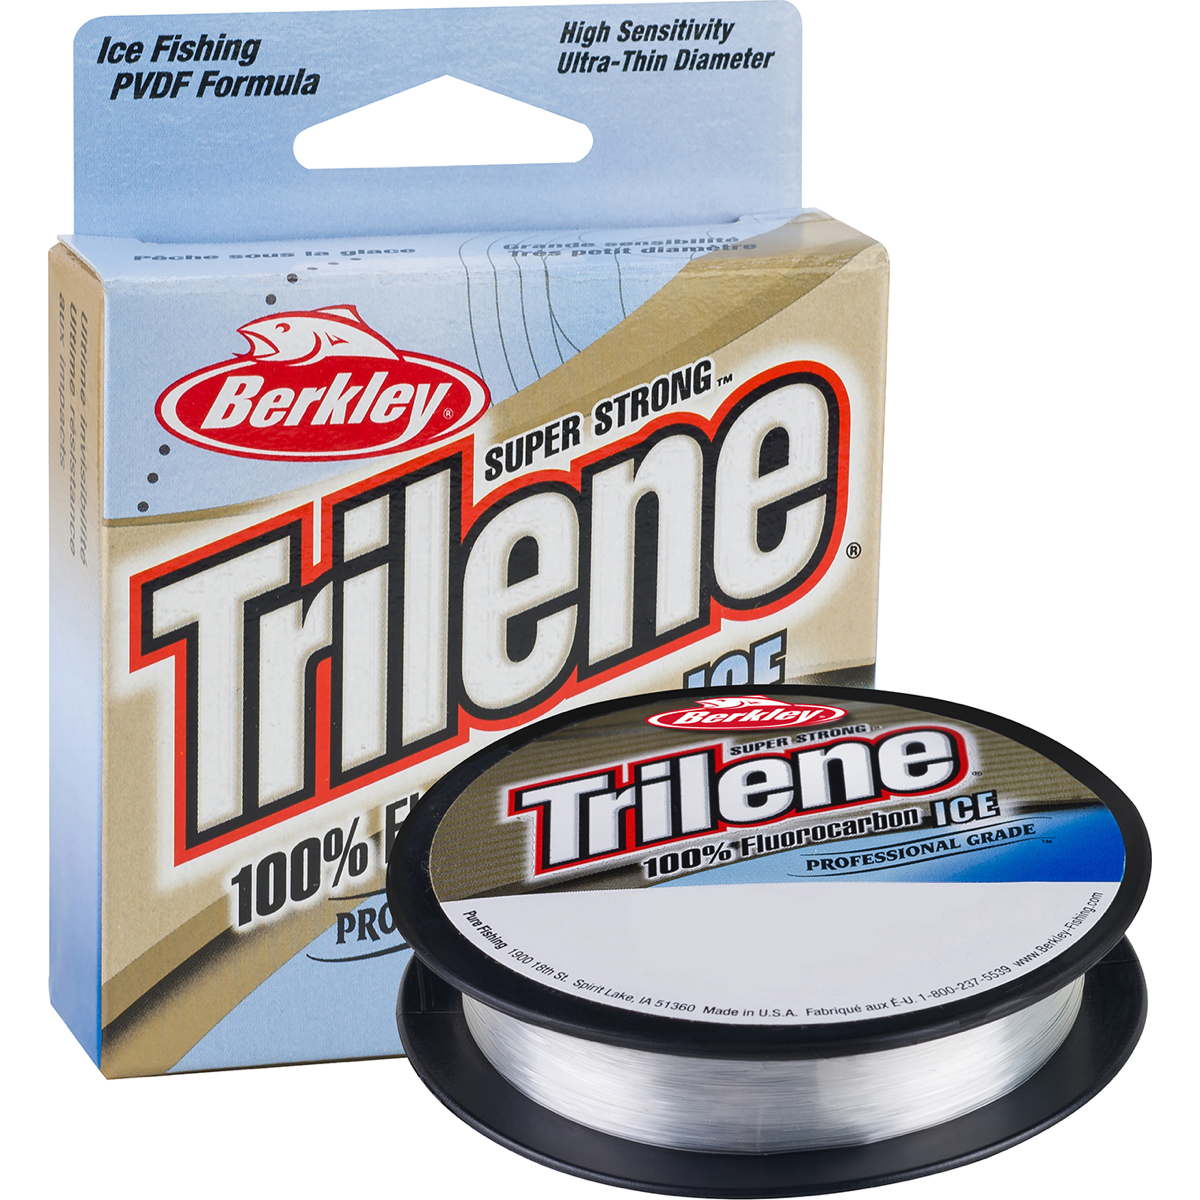 Photo of Berkley Trilene 100% Fluorocarbon Ice for sale at United Tackle Shops.